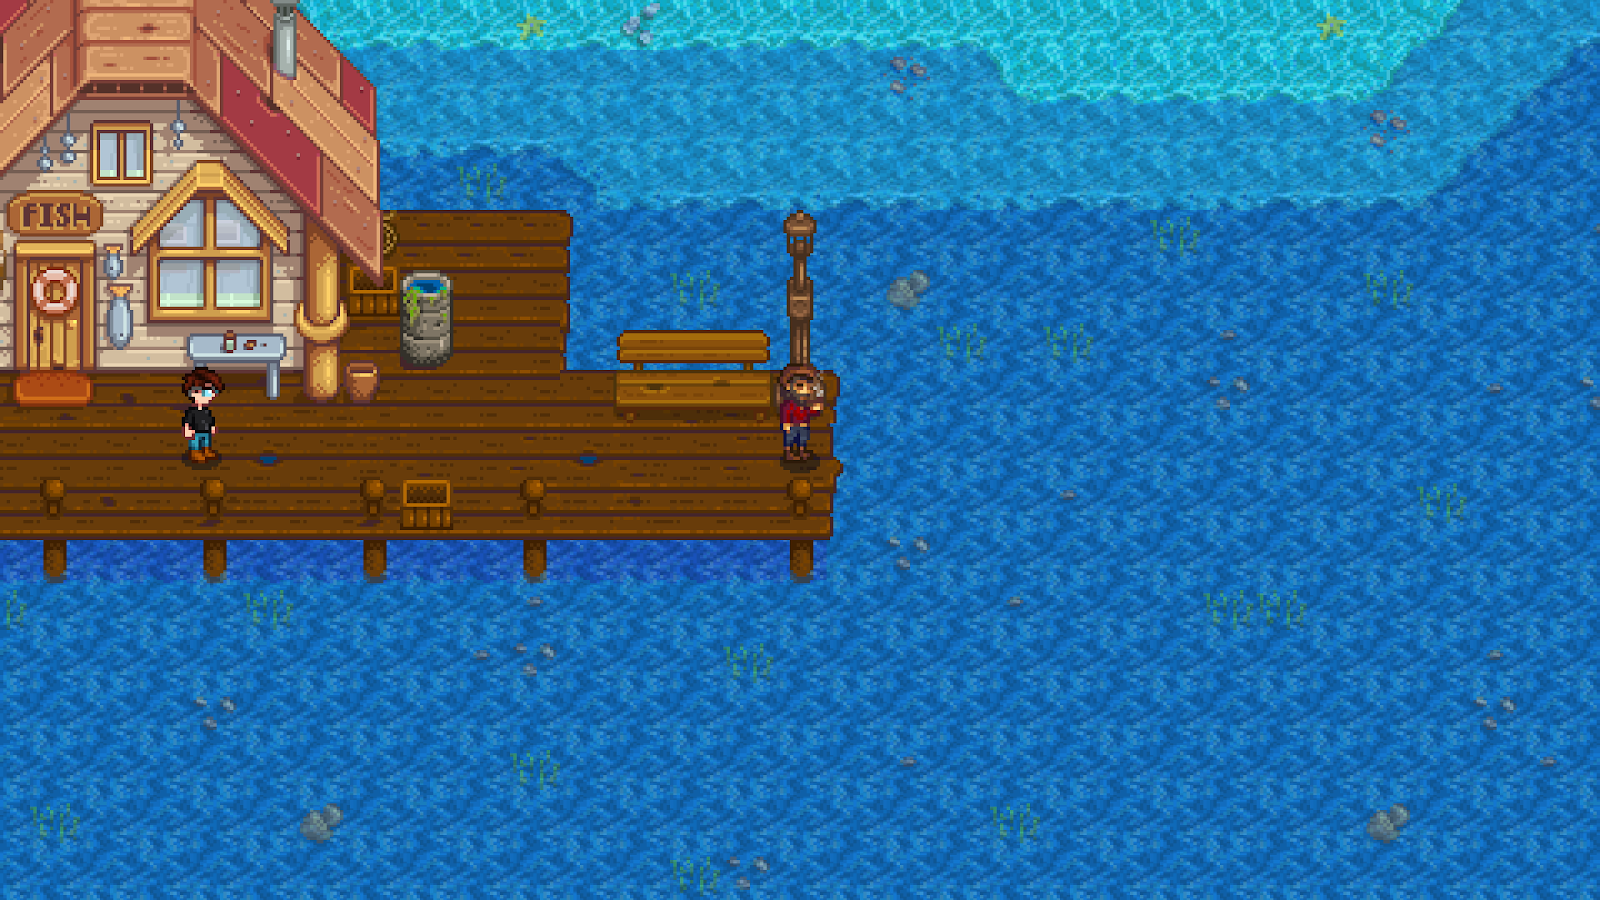 stardew valley fishing guide 2018